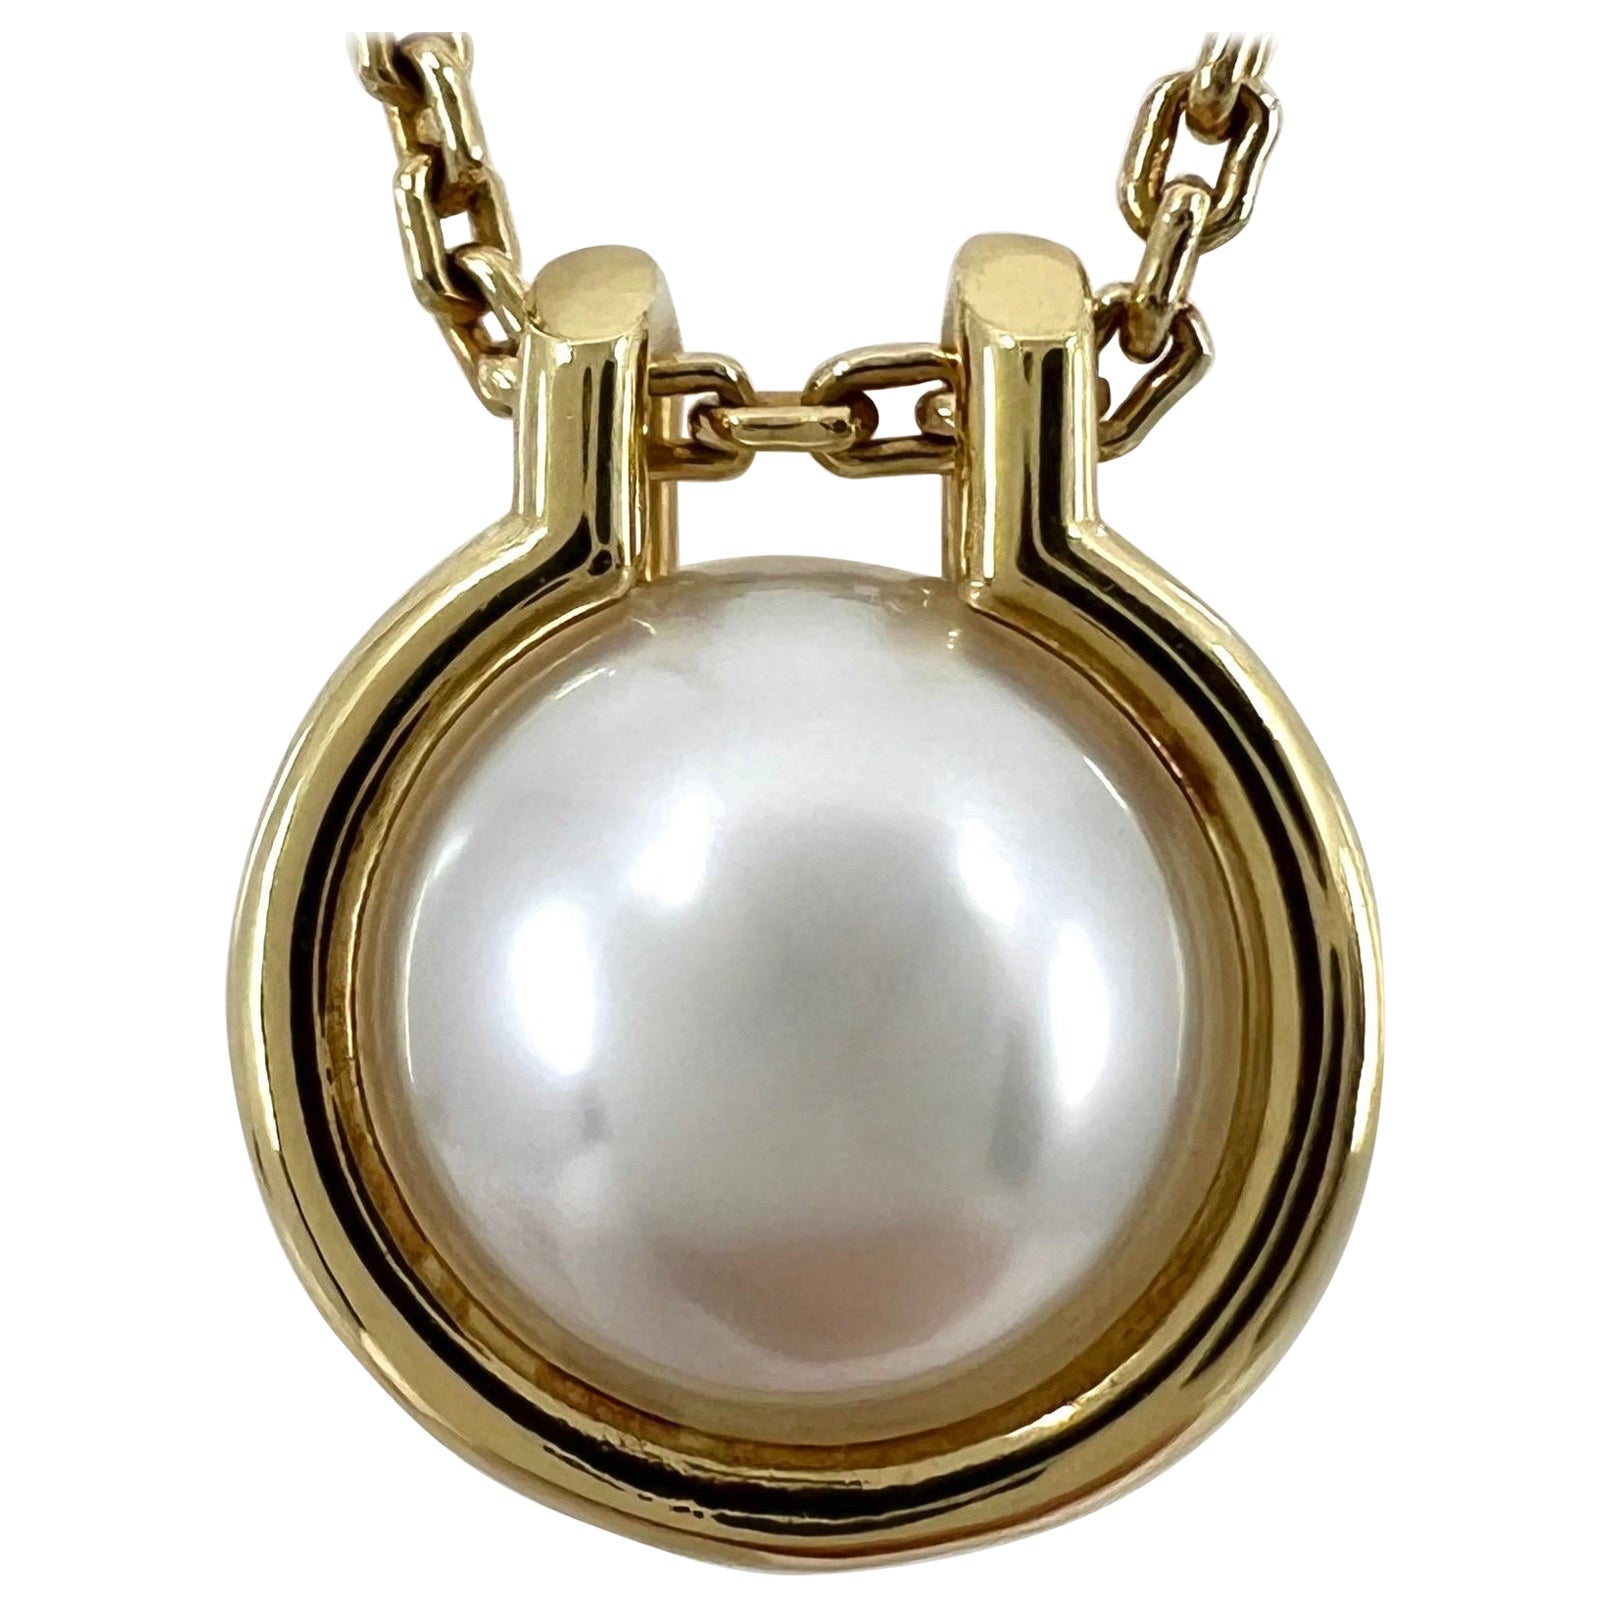 How much does a real pearl necklace cost?